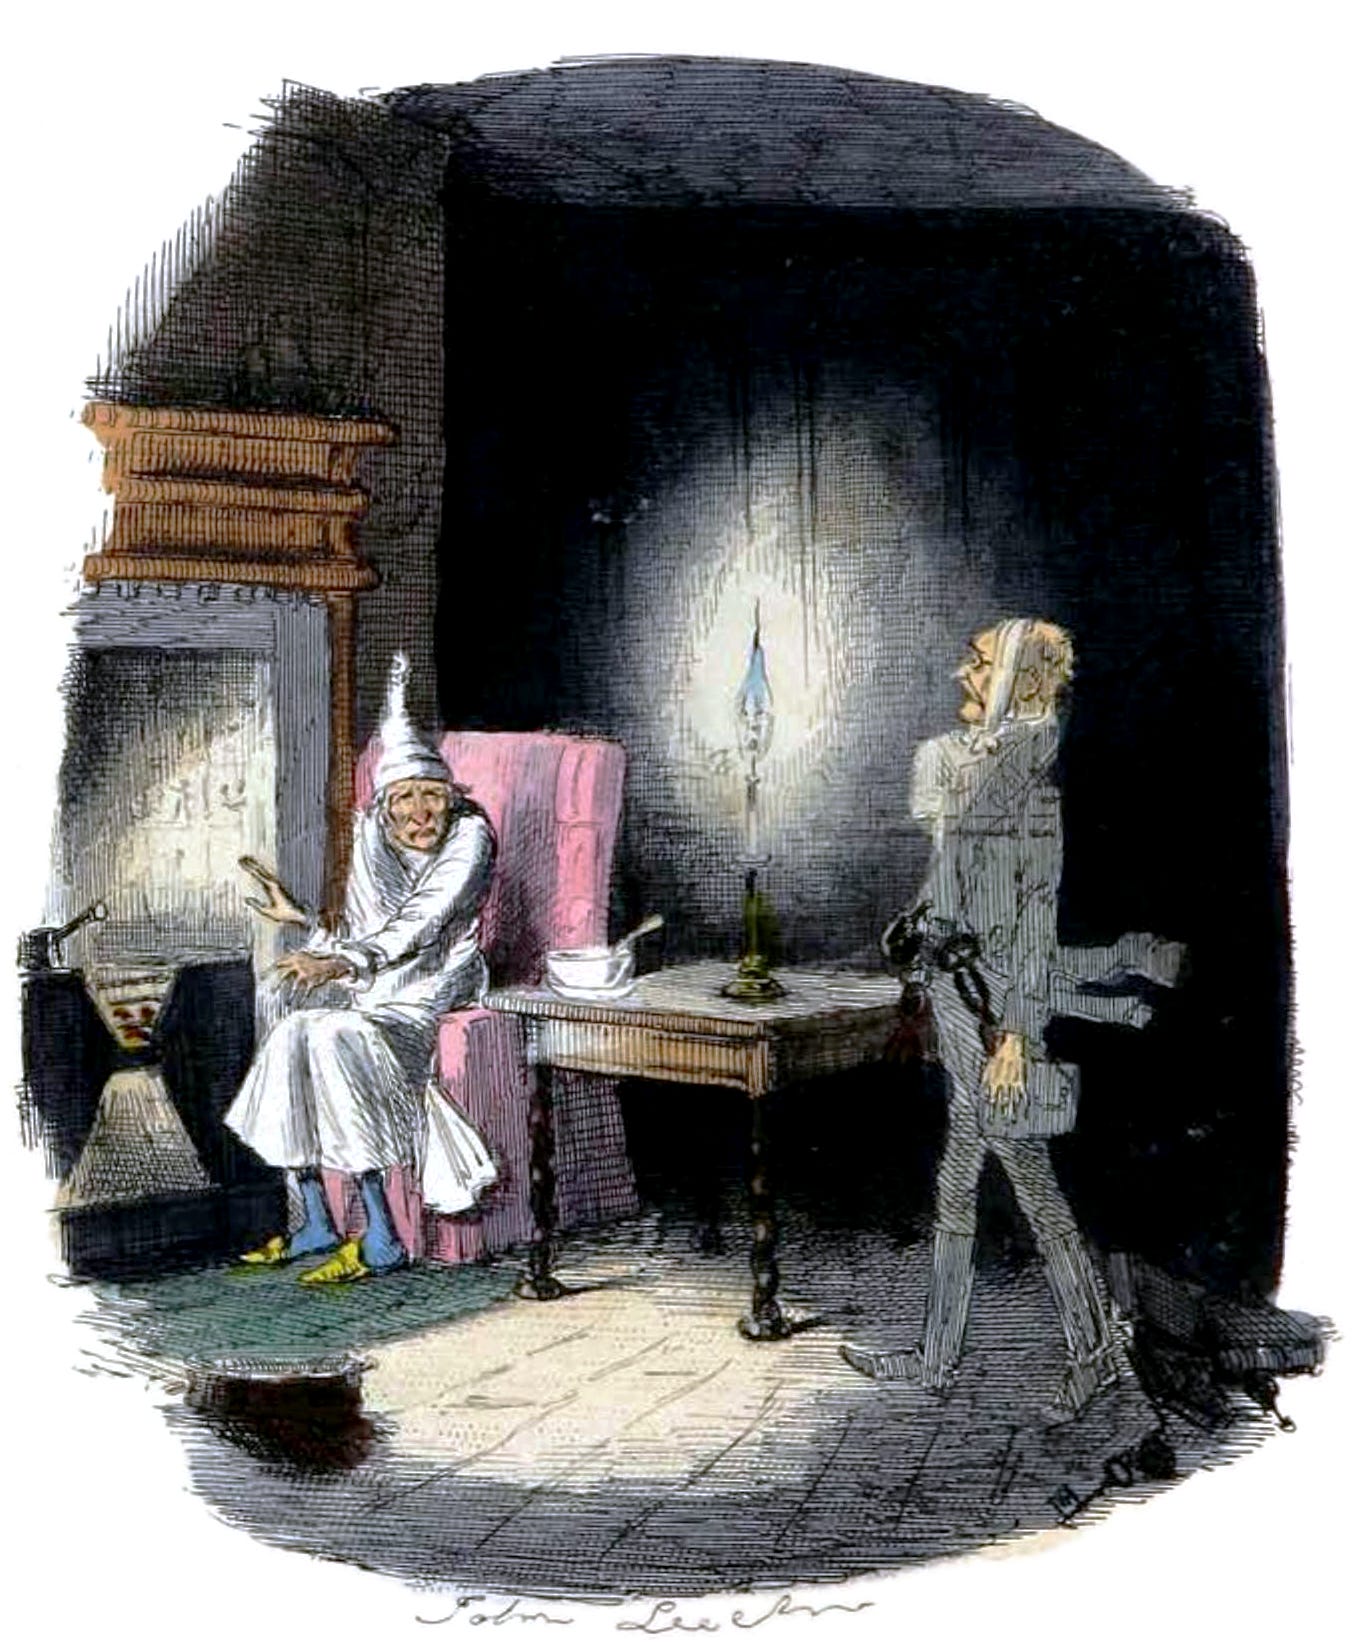 Marley's ghost confronting Scrooge at his fireside